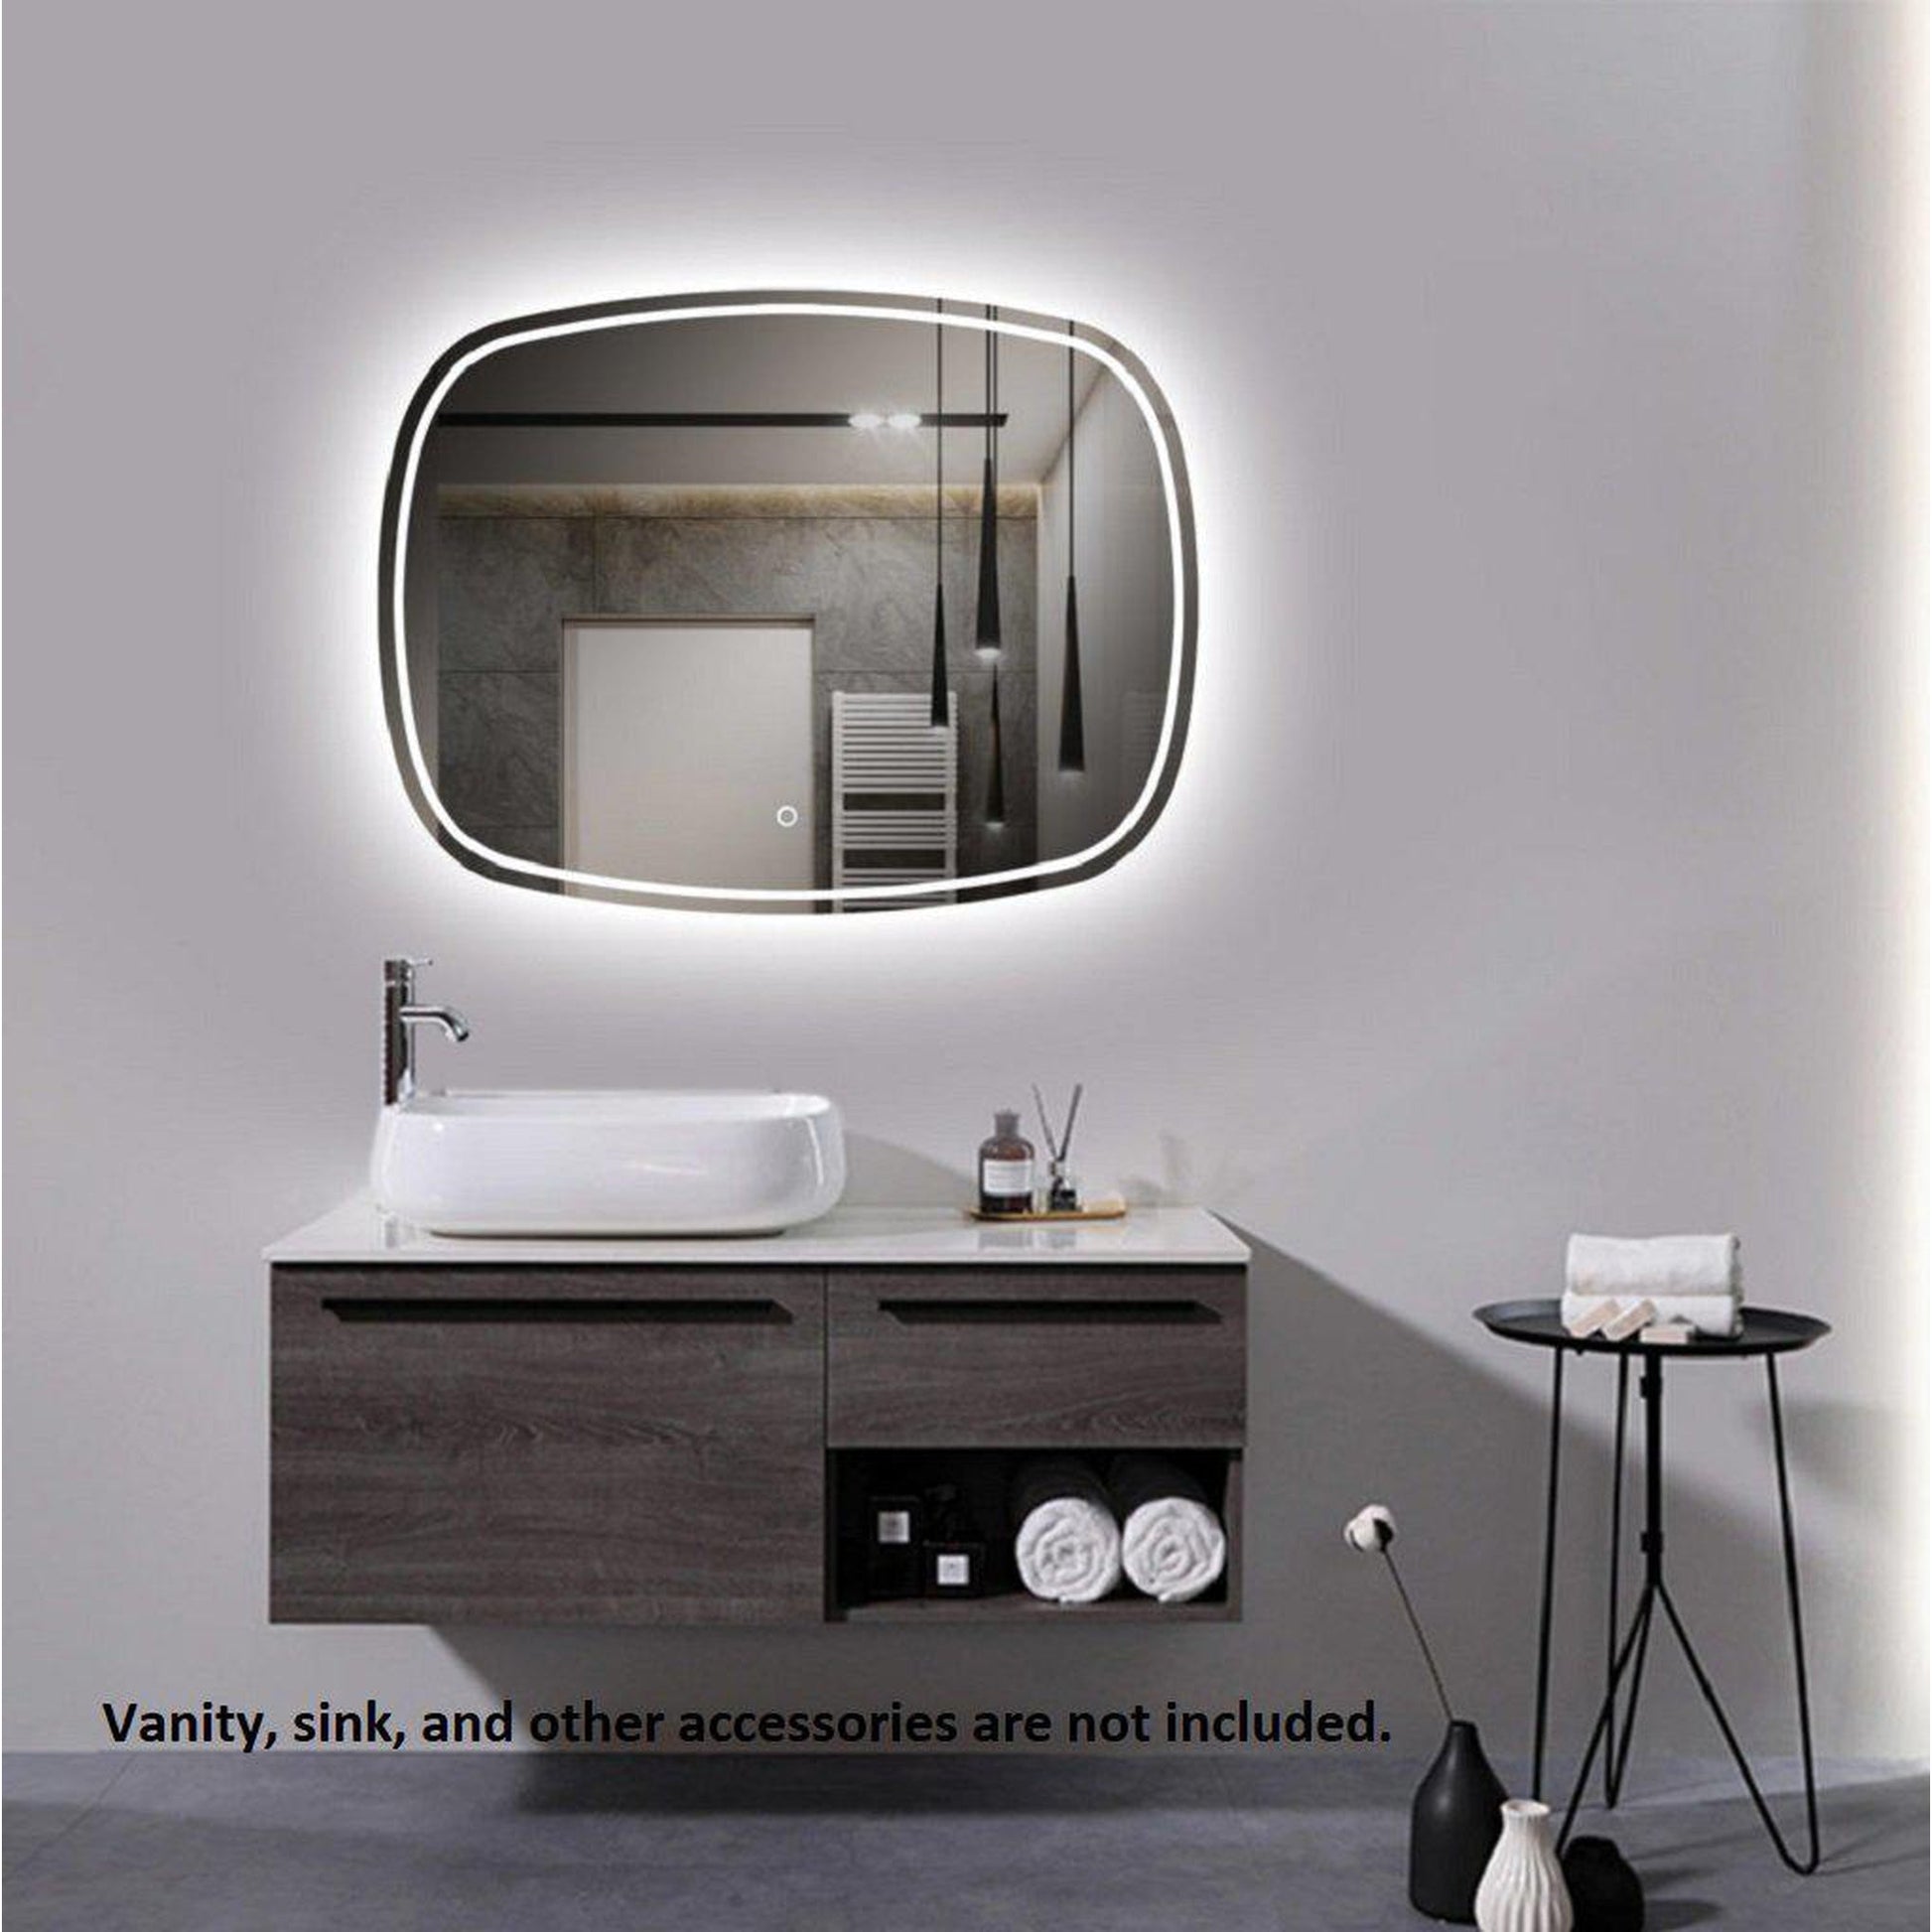 Lighted Impressions Magnum 32" x 24" Oval Frameless Wall-Mounted LED Mirror With Touch Sensor